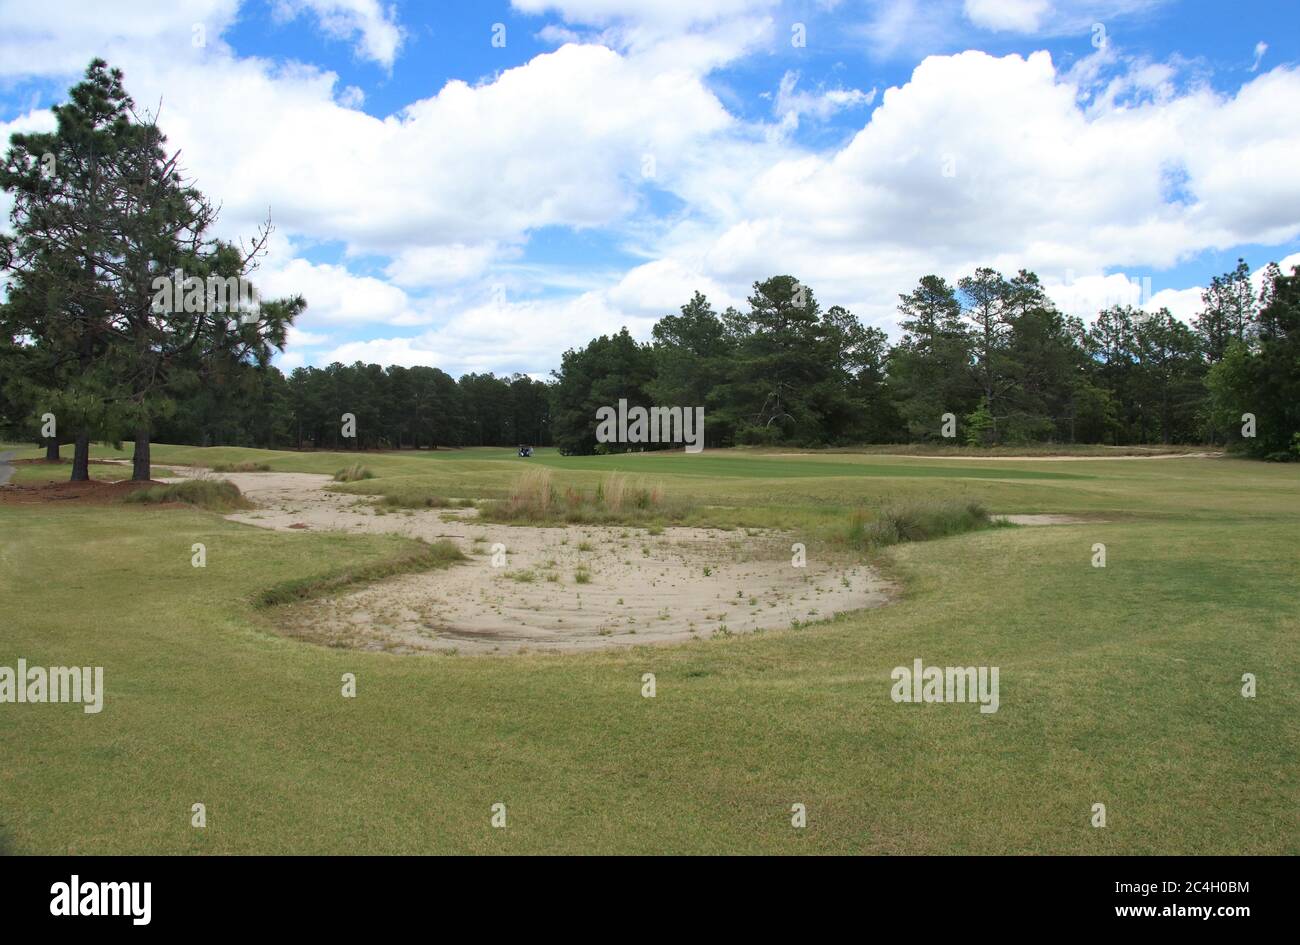 Golf course bunker/ sand trap on a golf course sourrounded by trees Stock Photo